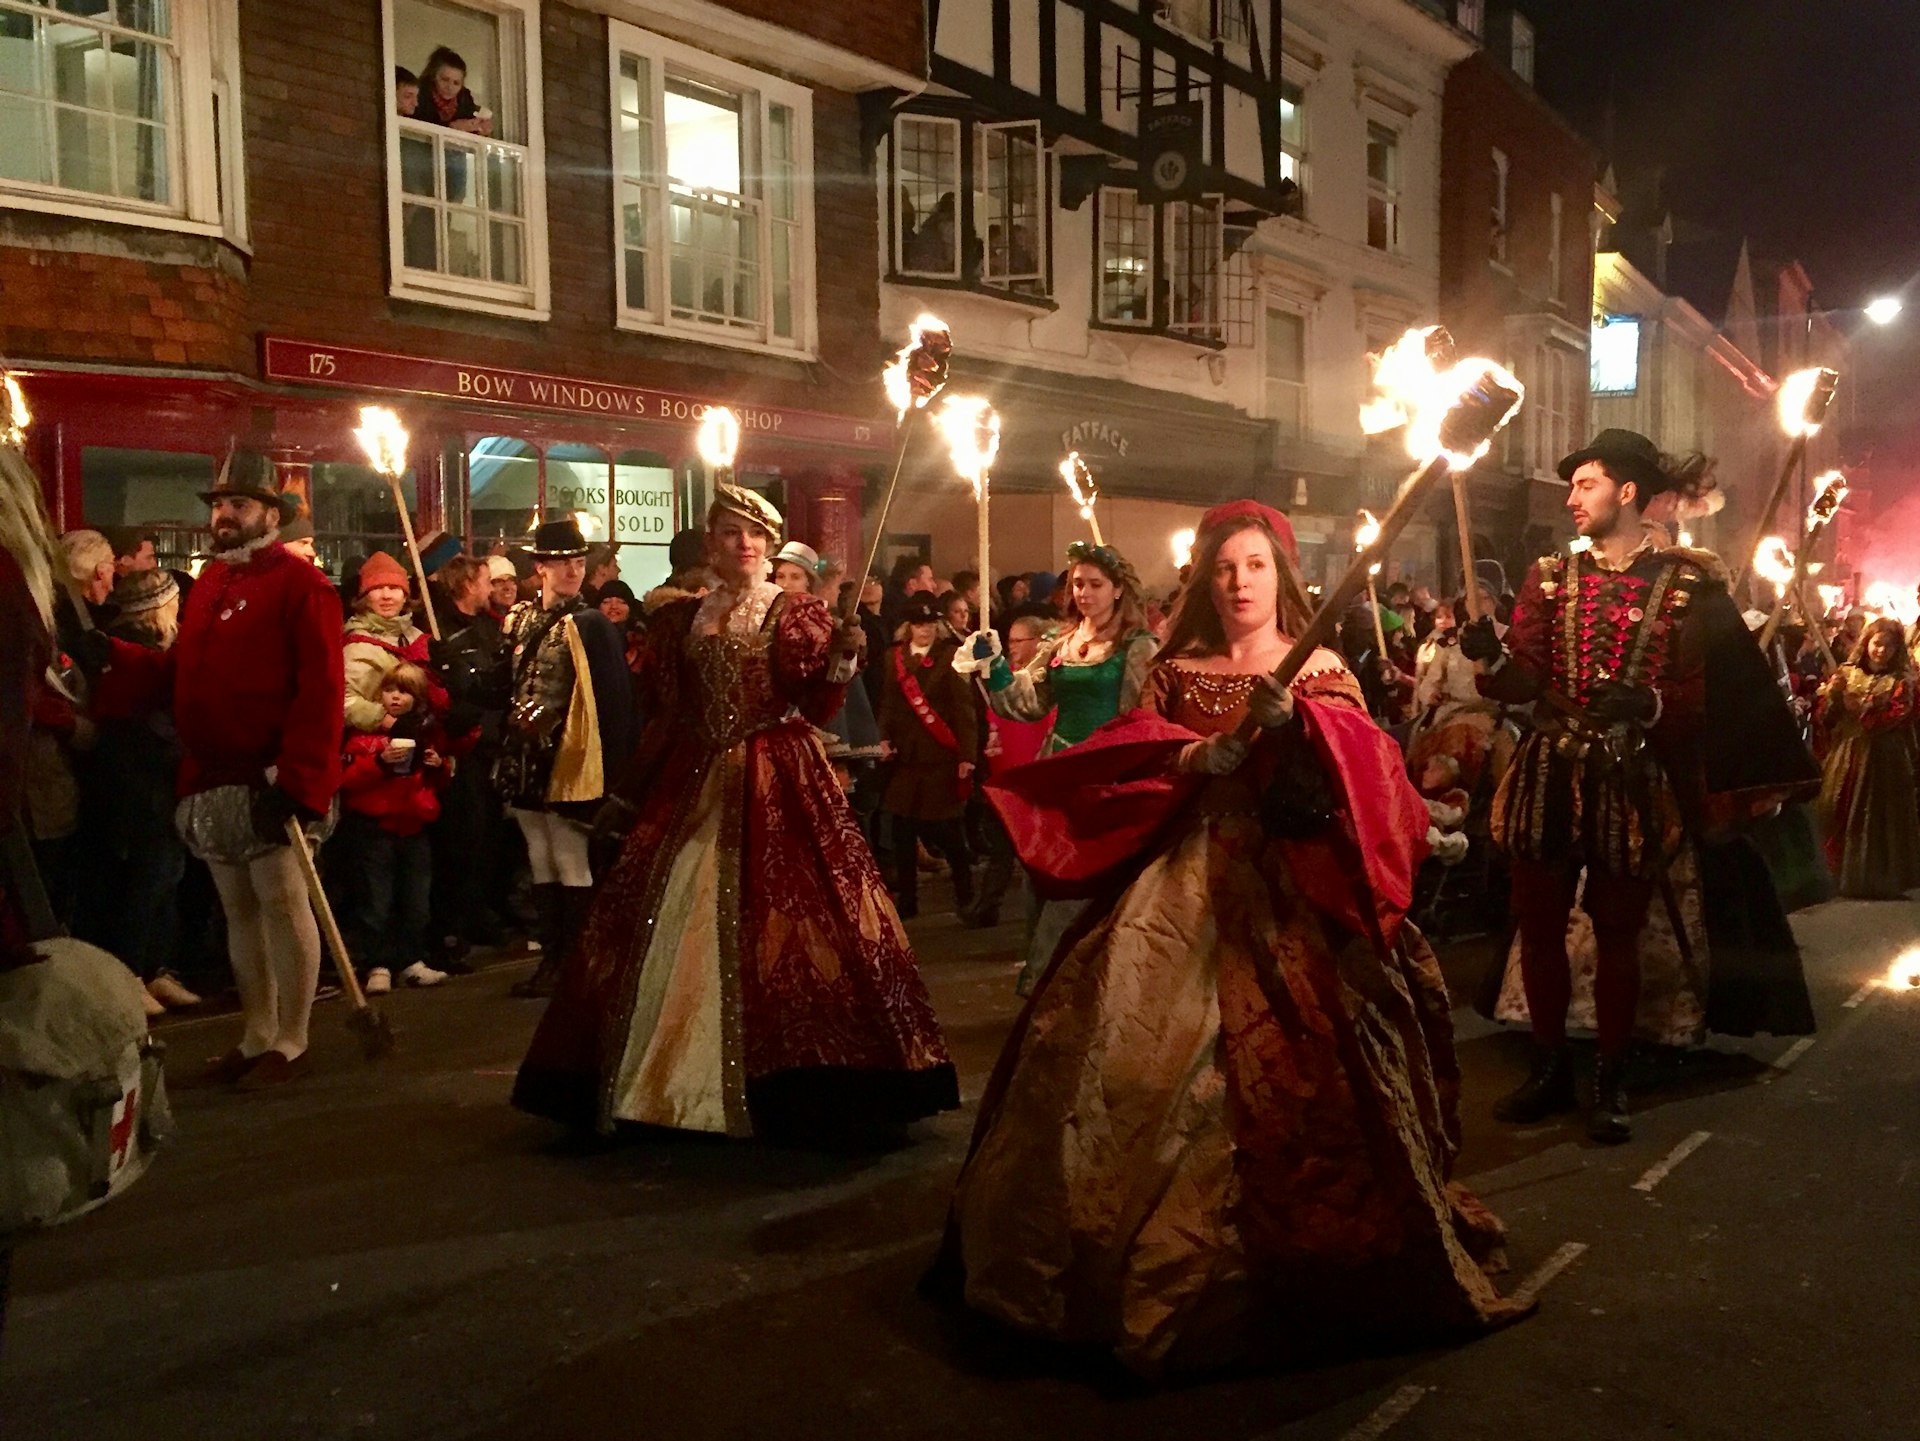 Men and women wearing elaborate historical costumes hold flaming torches as they parade down a street in Lewes.